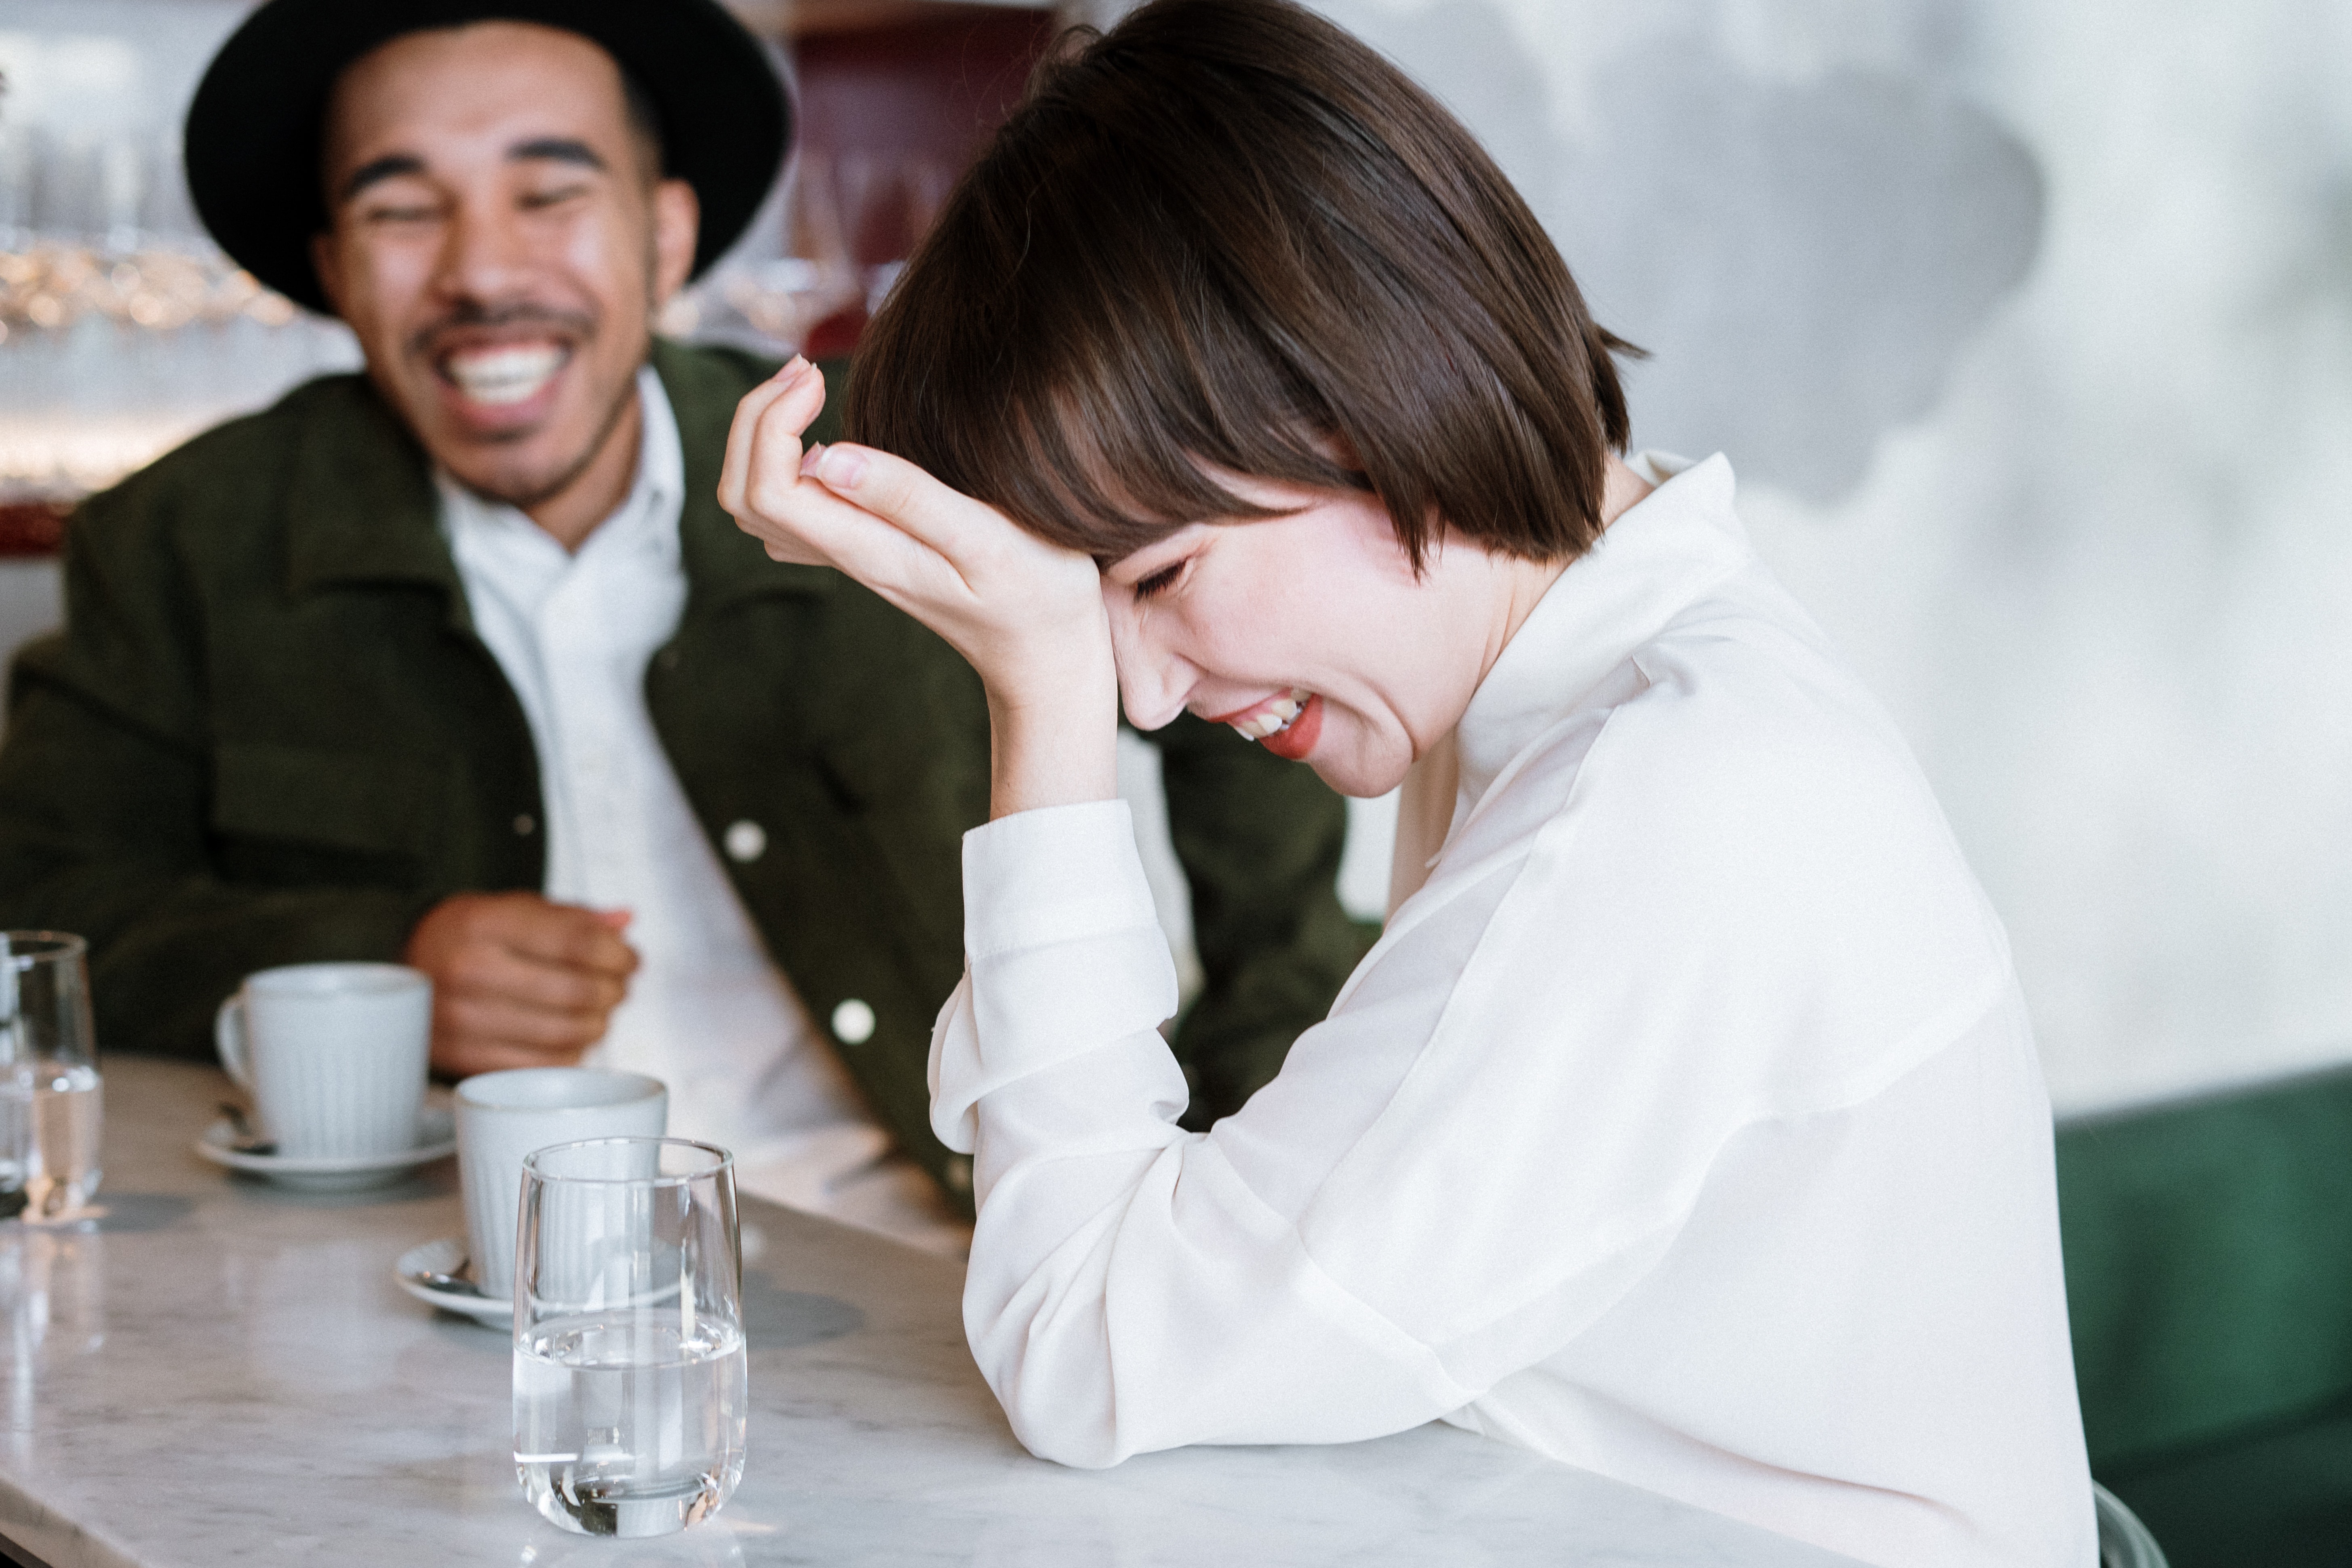 A man and a woman laughing | Source: Pexels